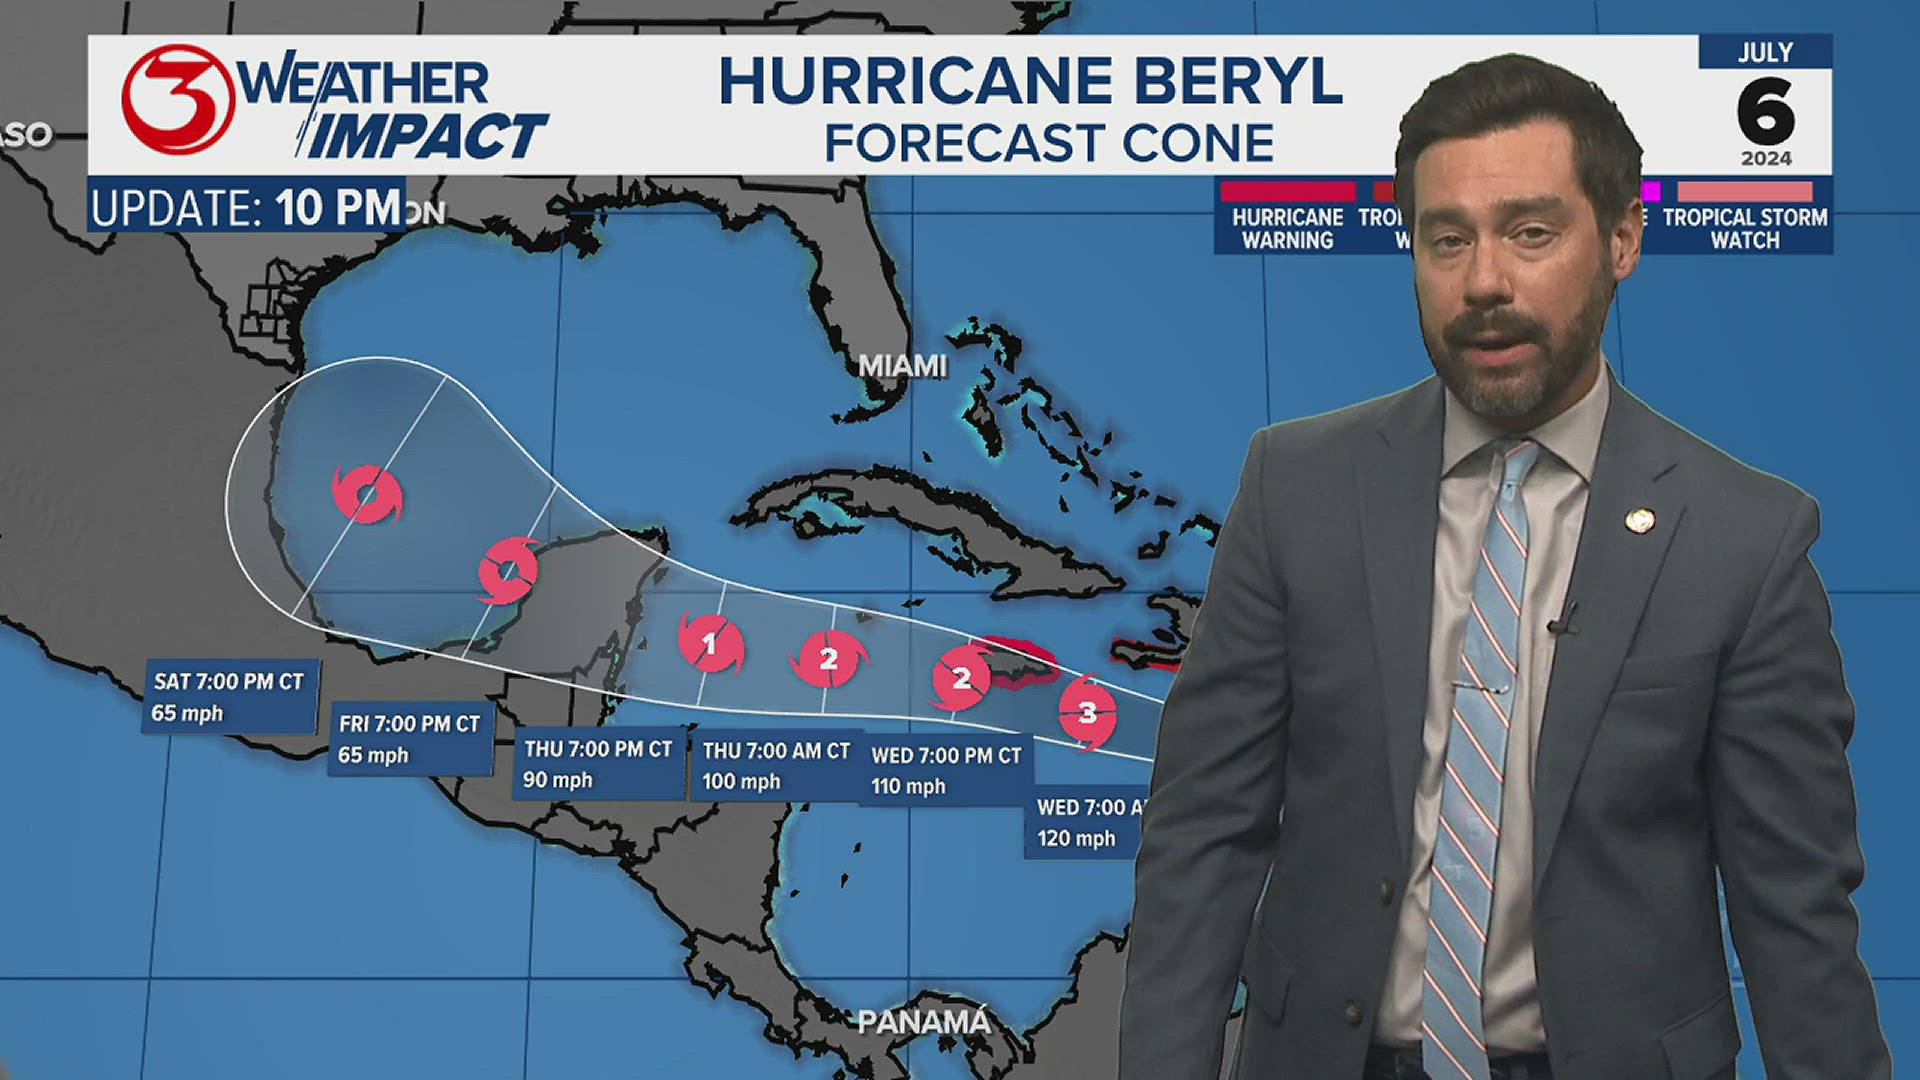 Will Hurricane Beryl hit Texas? That's the question everyone wants to know. We'll be watching a high pressure system that could influence Beryl's projected path.